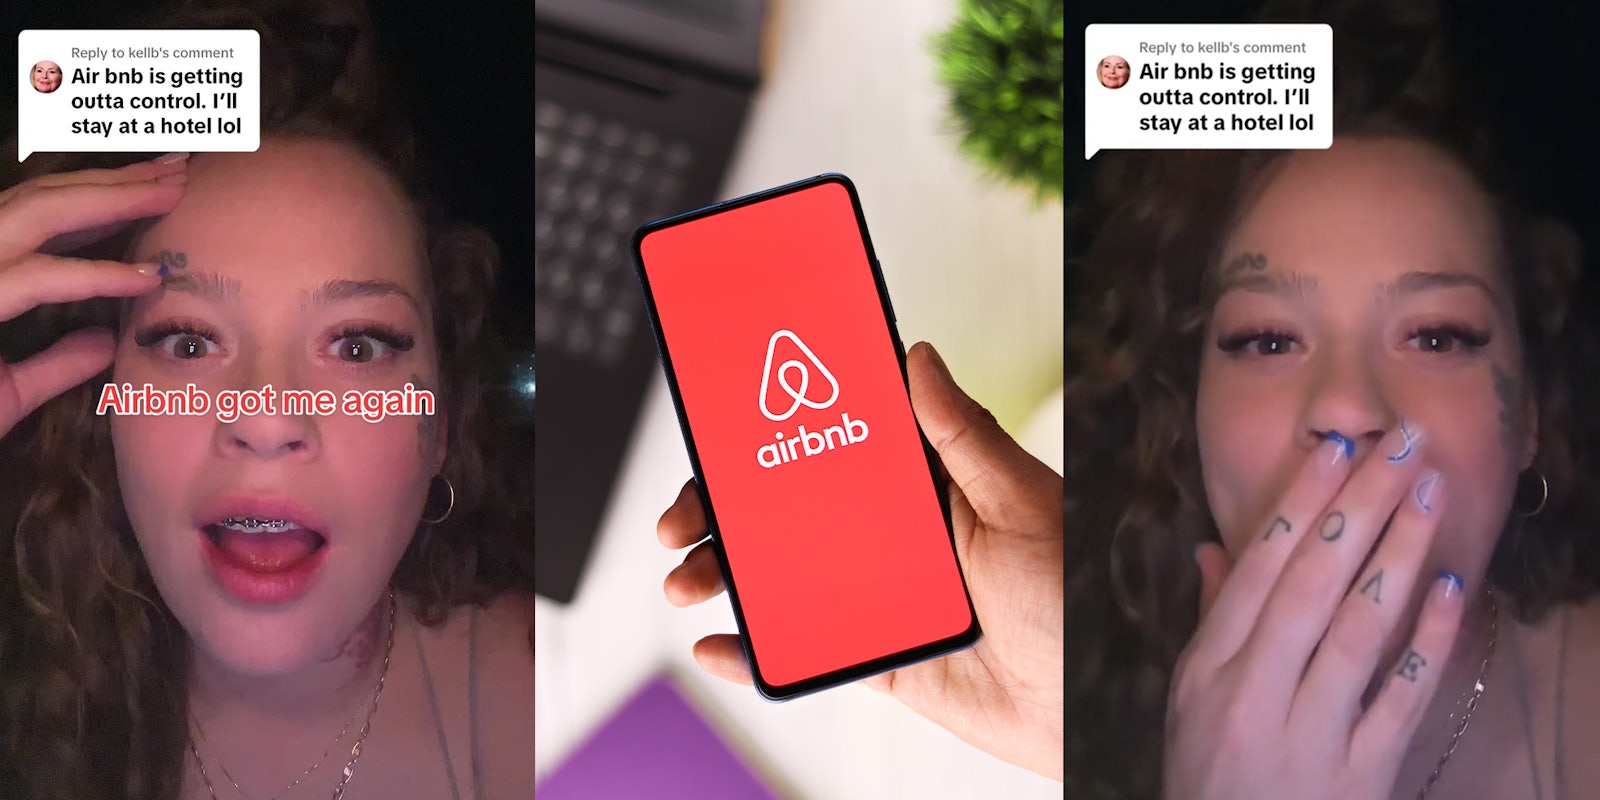 Airbnb host says check-in is 8-10pm. He demands to see her ID when guest tries to arrive at 10:30